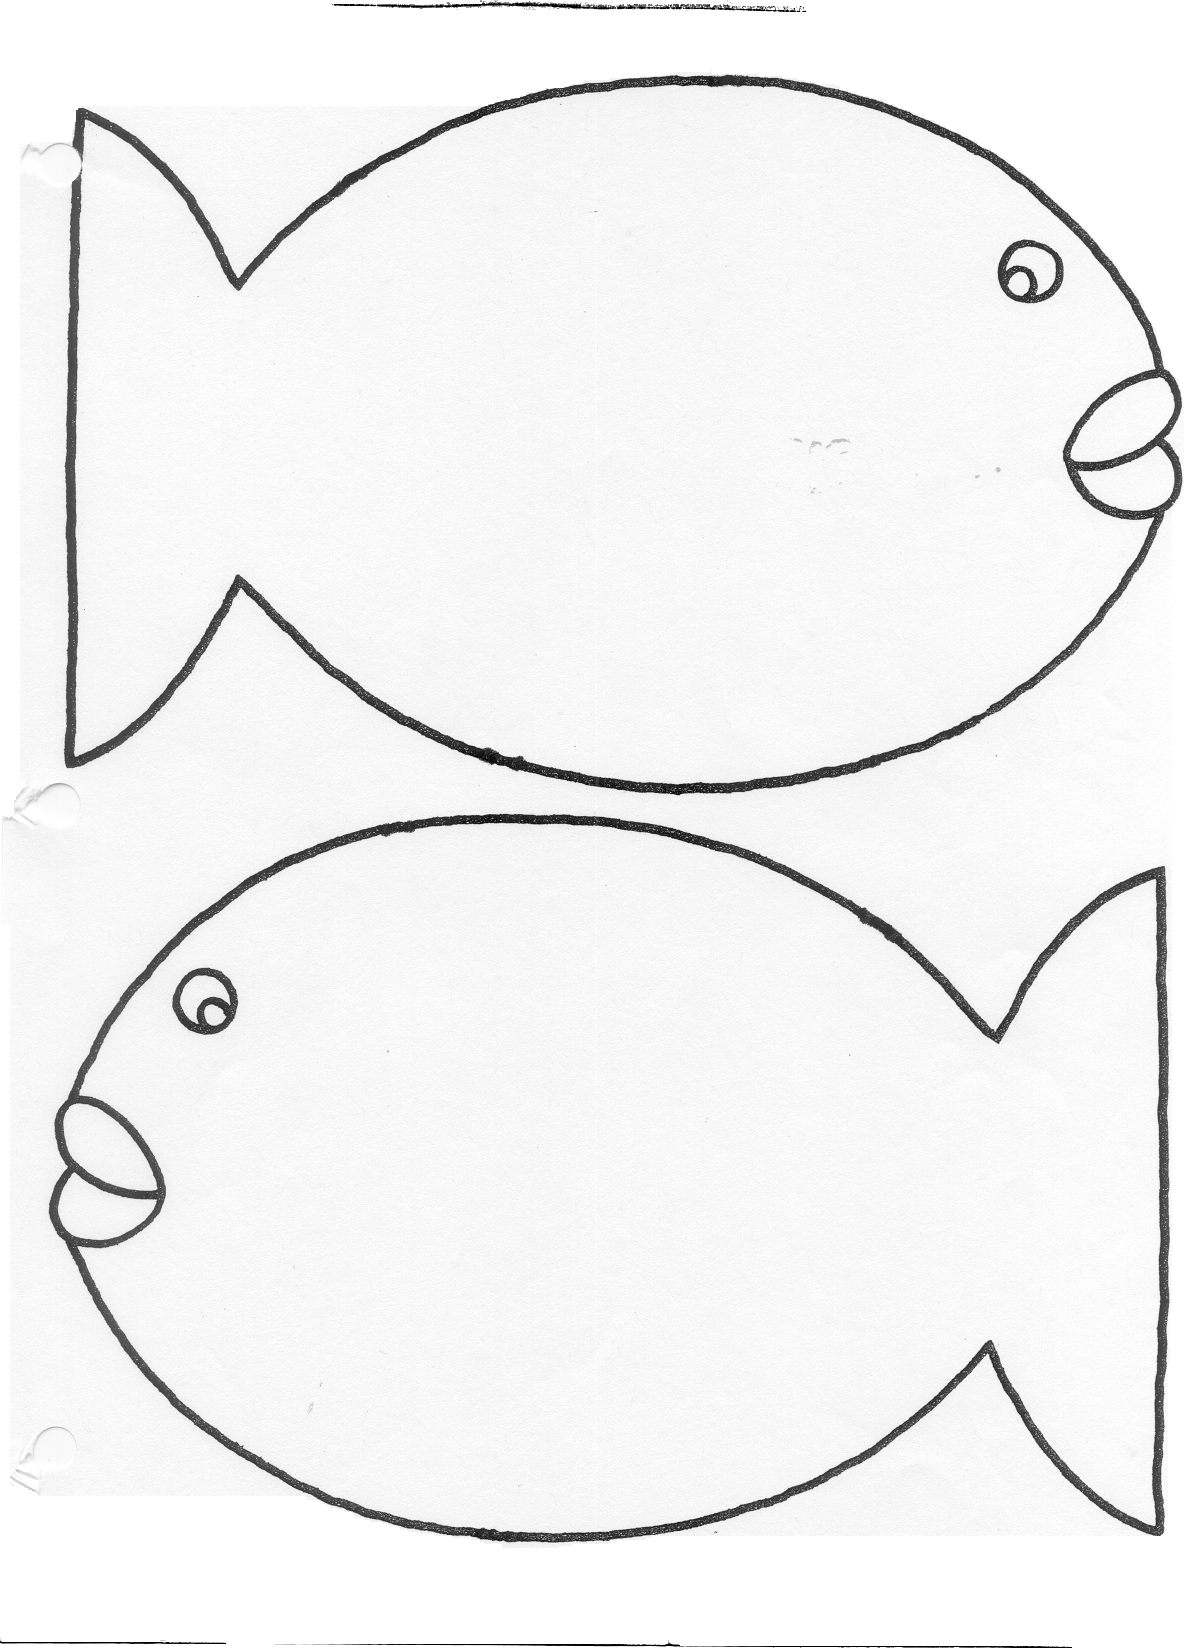 Free Fish Templates, Download Free Fish Templates png images, Free